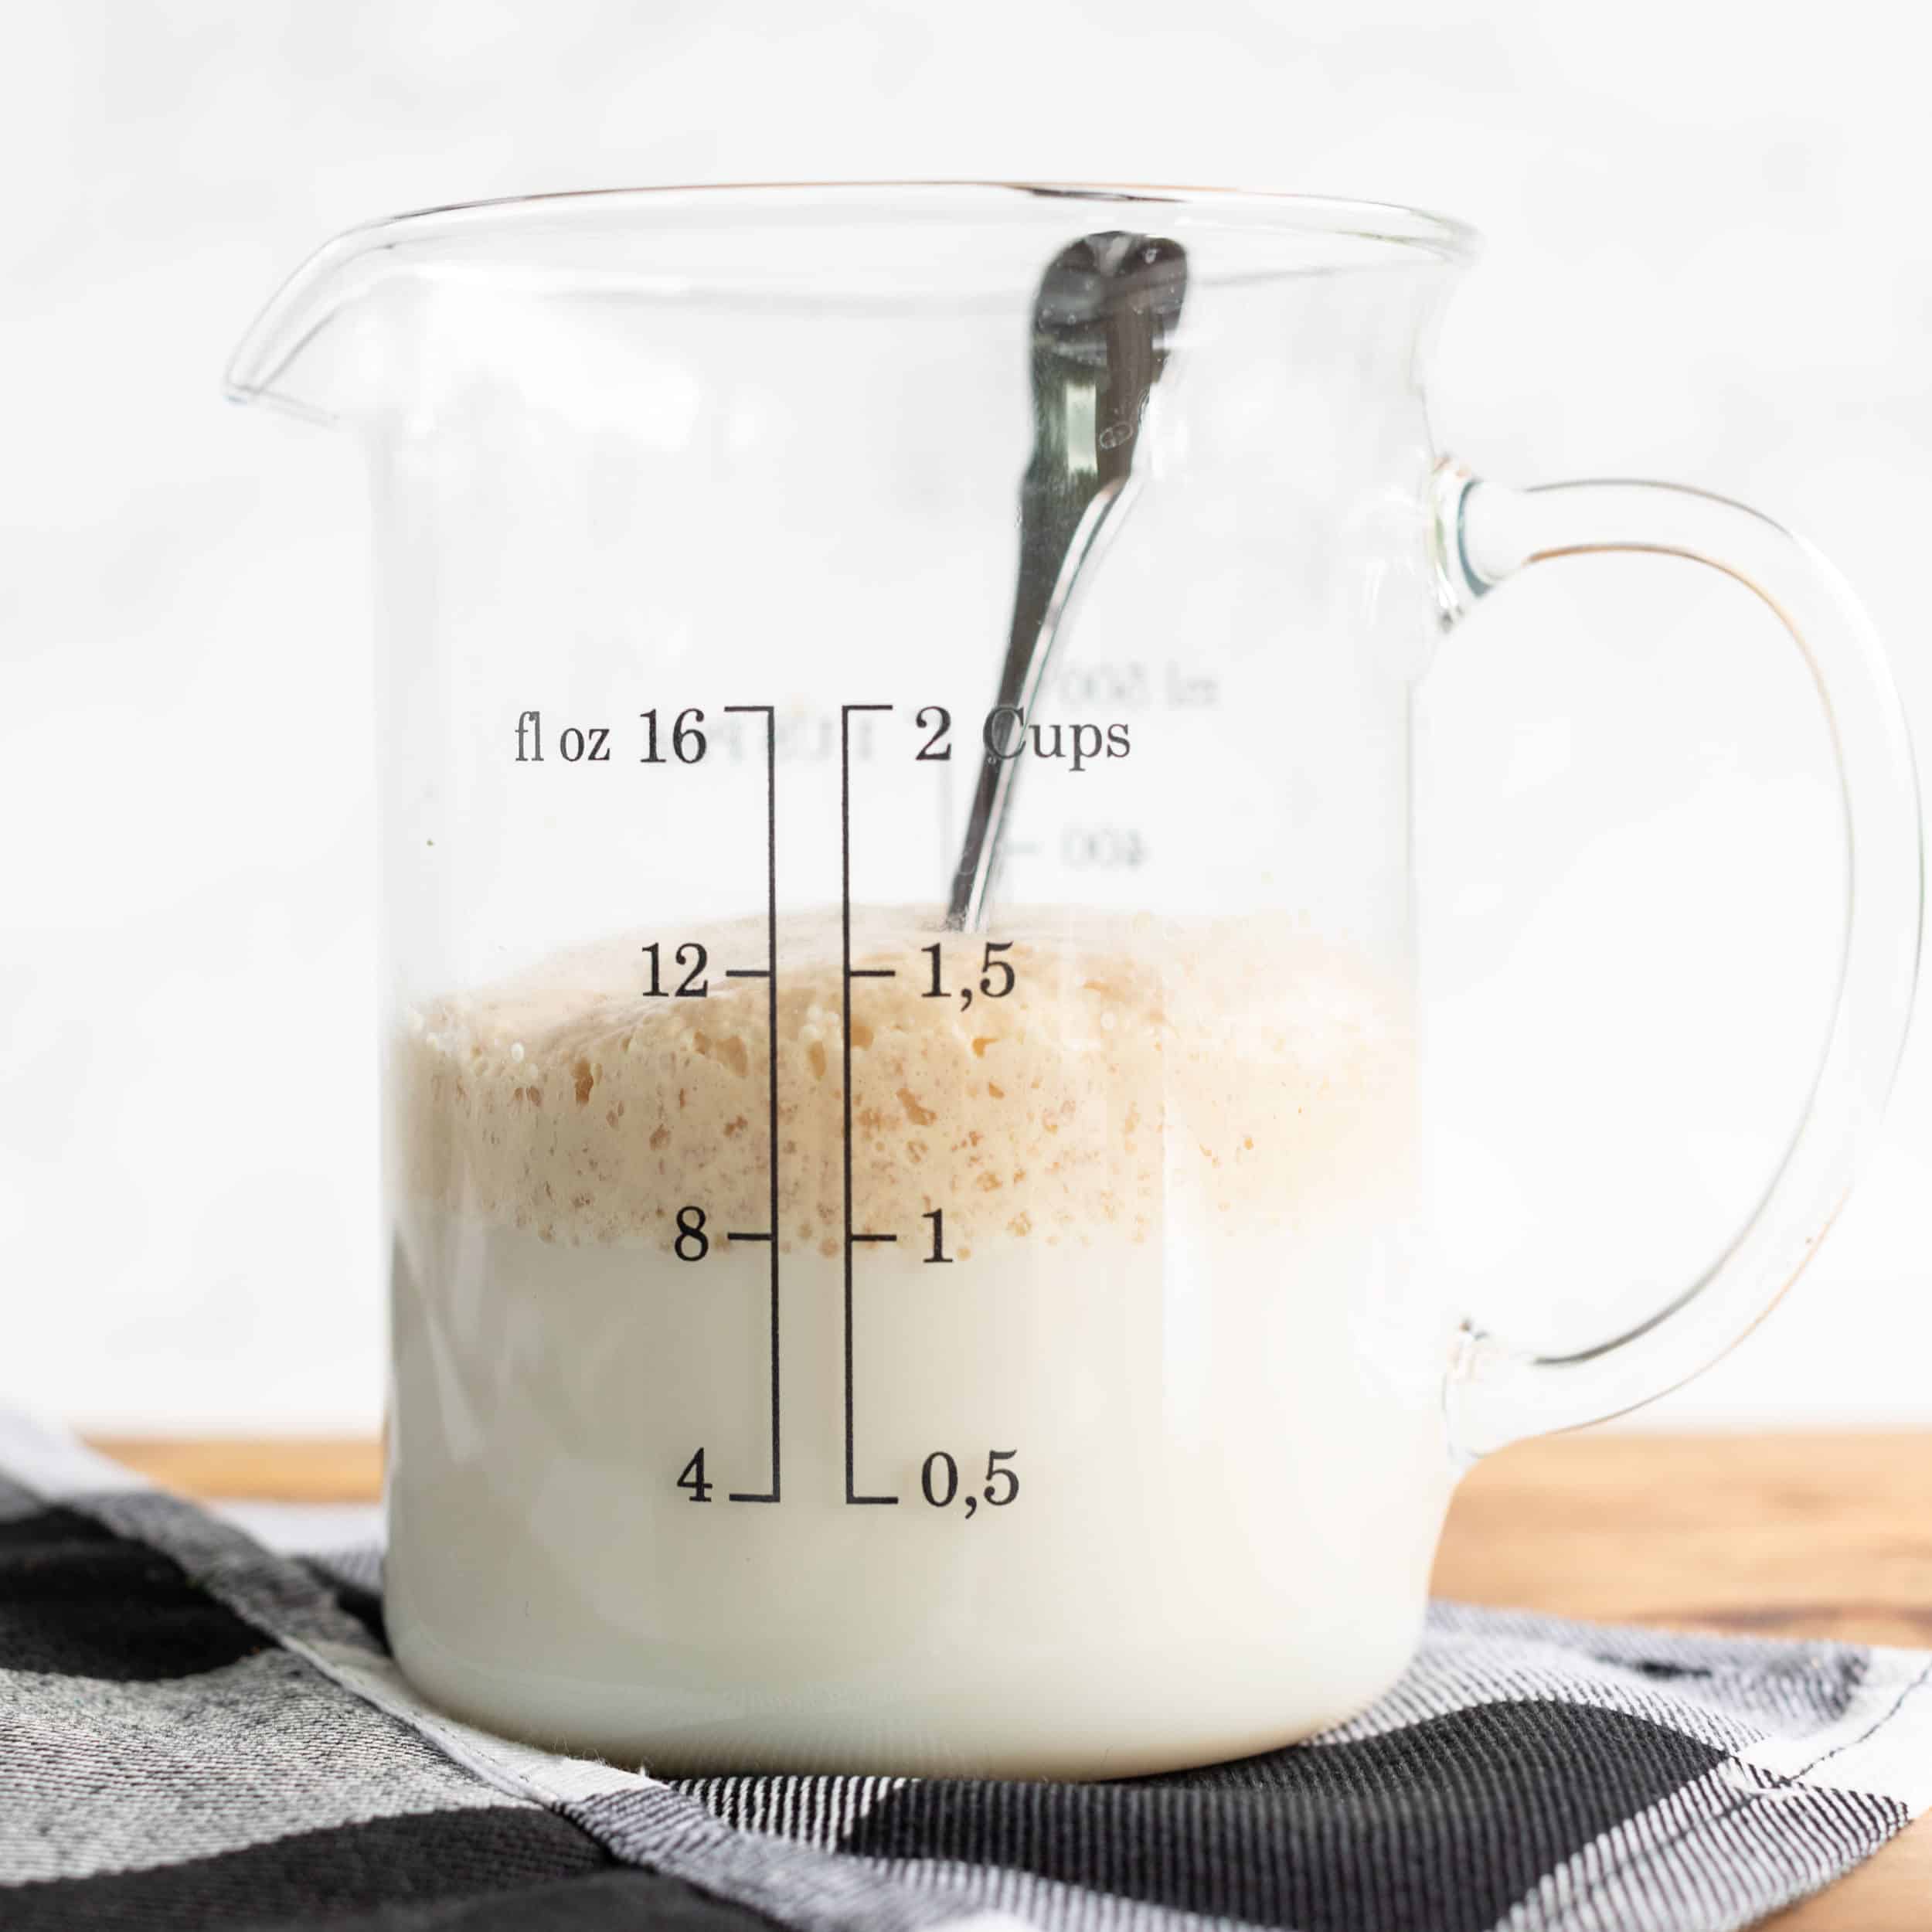 ½ cup of fat free milk and ½ cup of water with 2 ¼ teaspoon of active dry yeast and 1 tablespoon of sugar. Up close picture of measuring cup showing a picture of dissolved activated yeast for Hawaiian sweet rolls